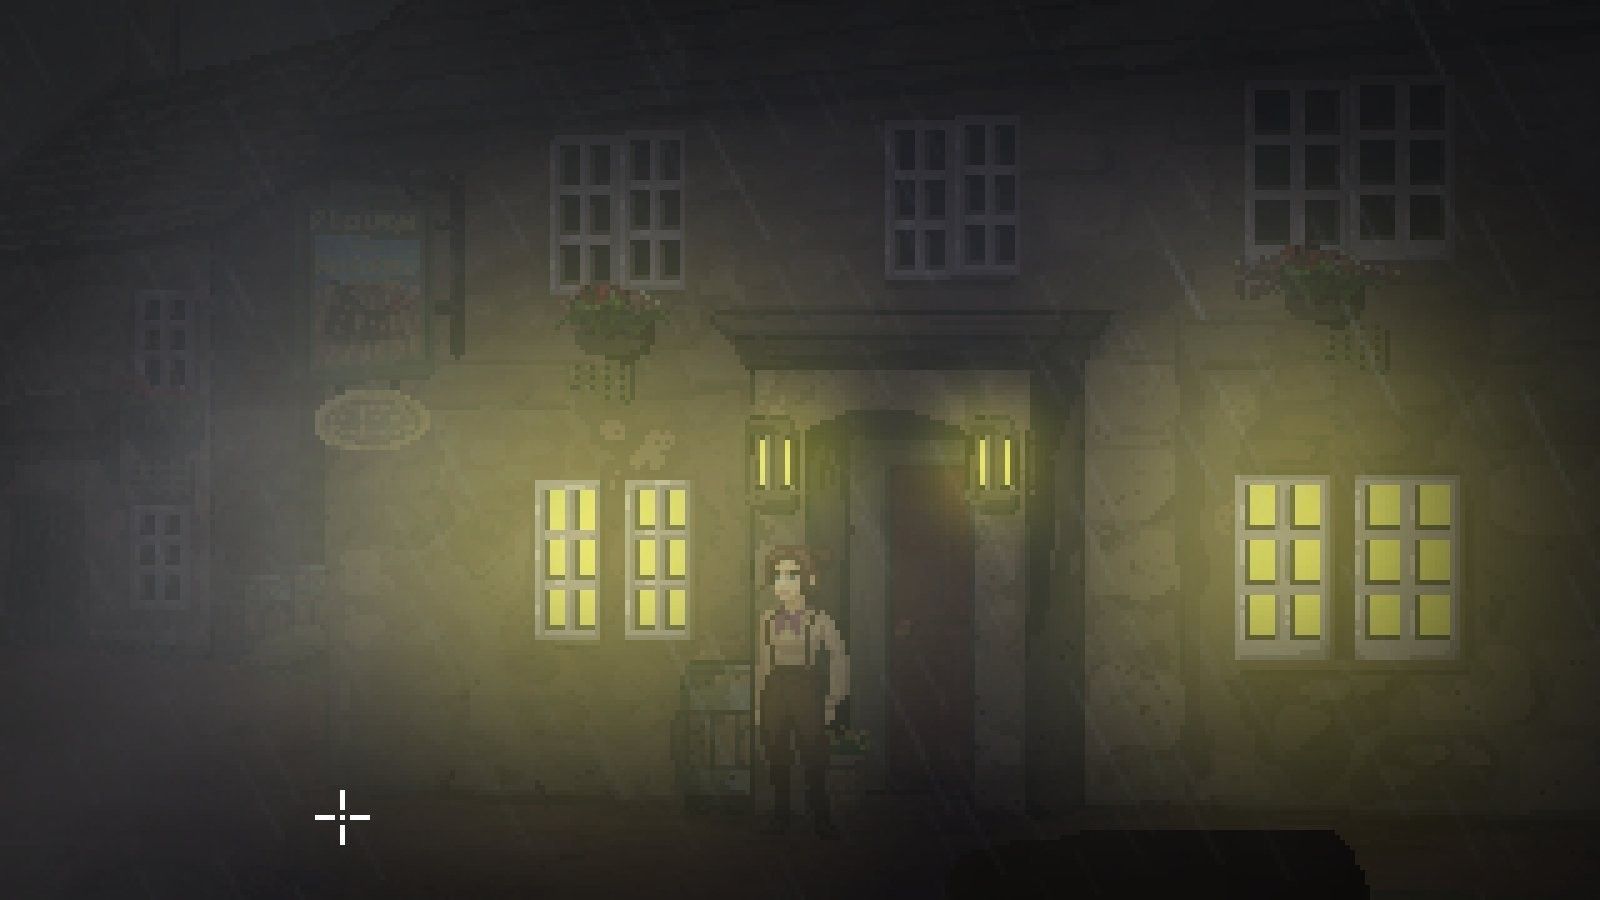 Thomasina stands outside the village pub on a dark, misty night in The Excavation Of Hob's Barrow